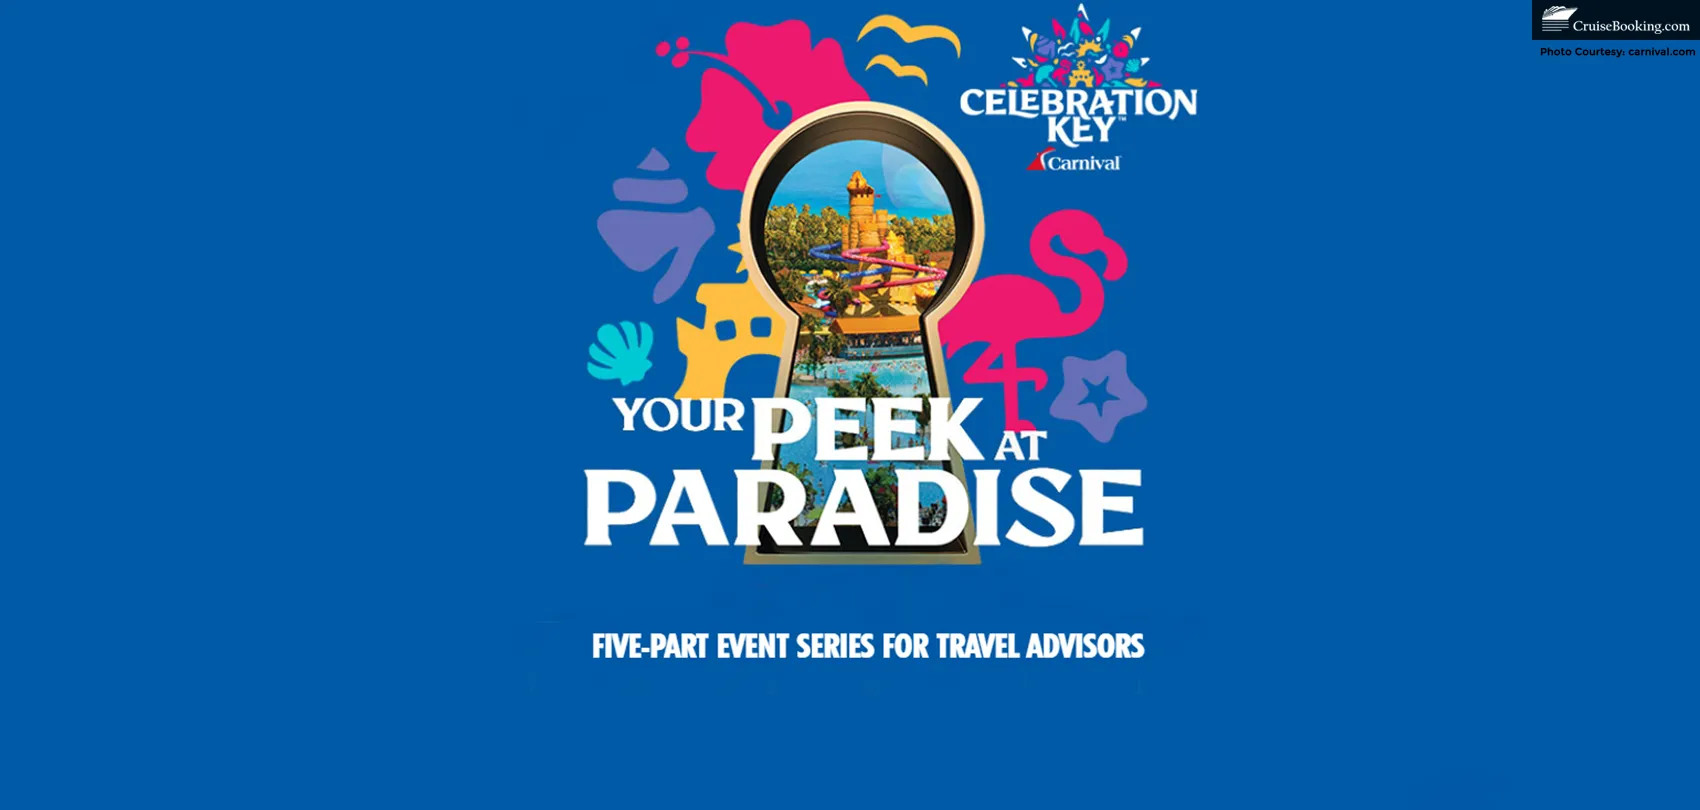 Carnival’s ‘Your Peek at Paradise’ A Look at Celebration Key